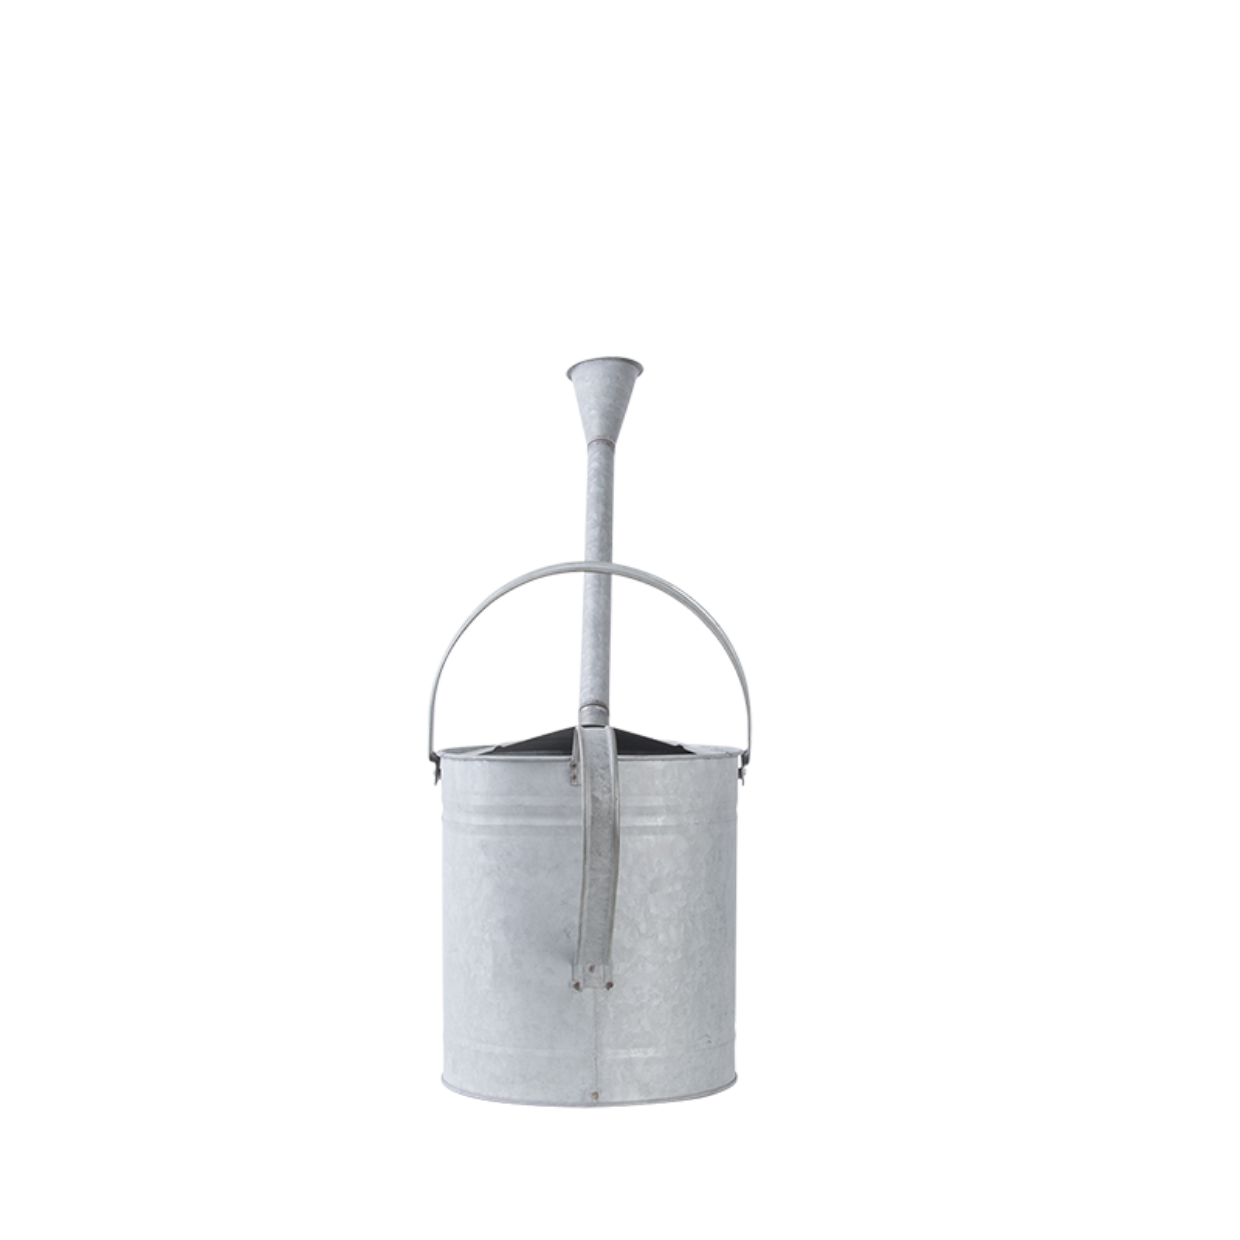 The Long Spout Watering Can